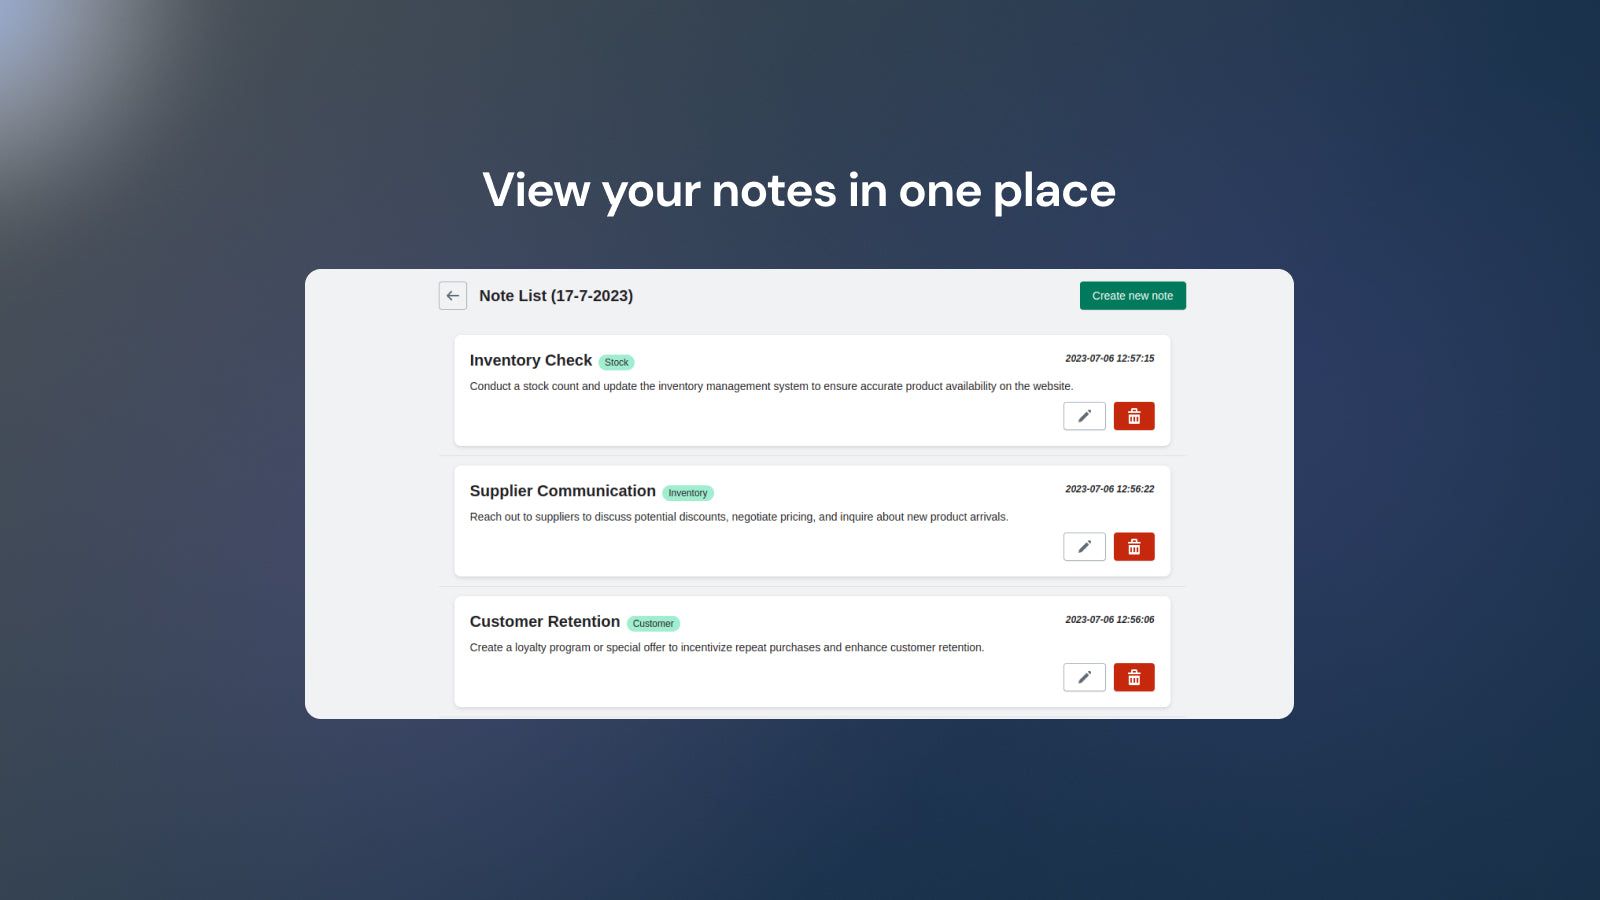 View your notes in one place.